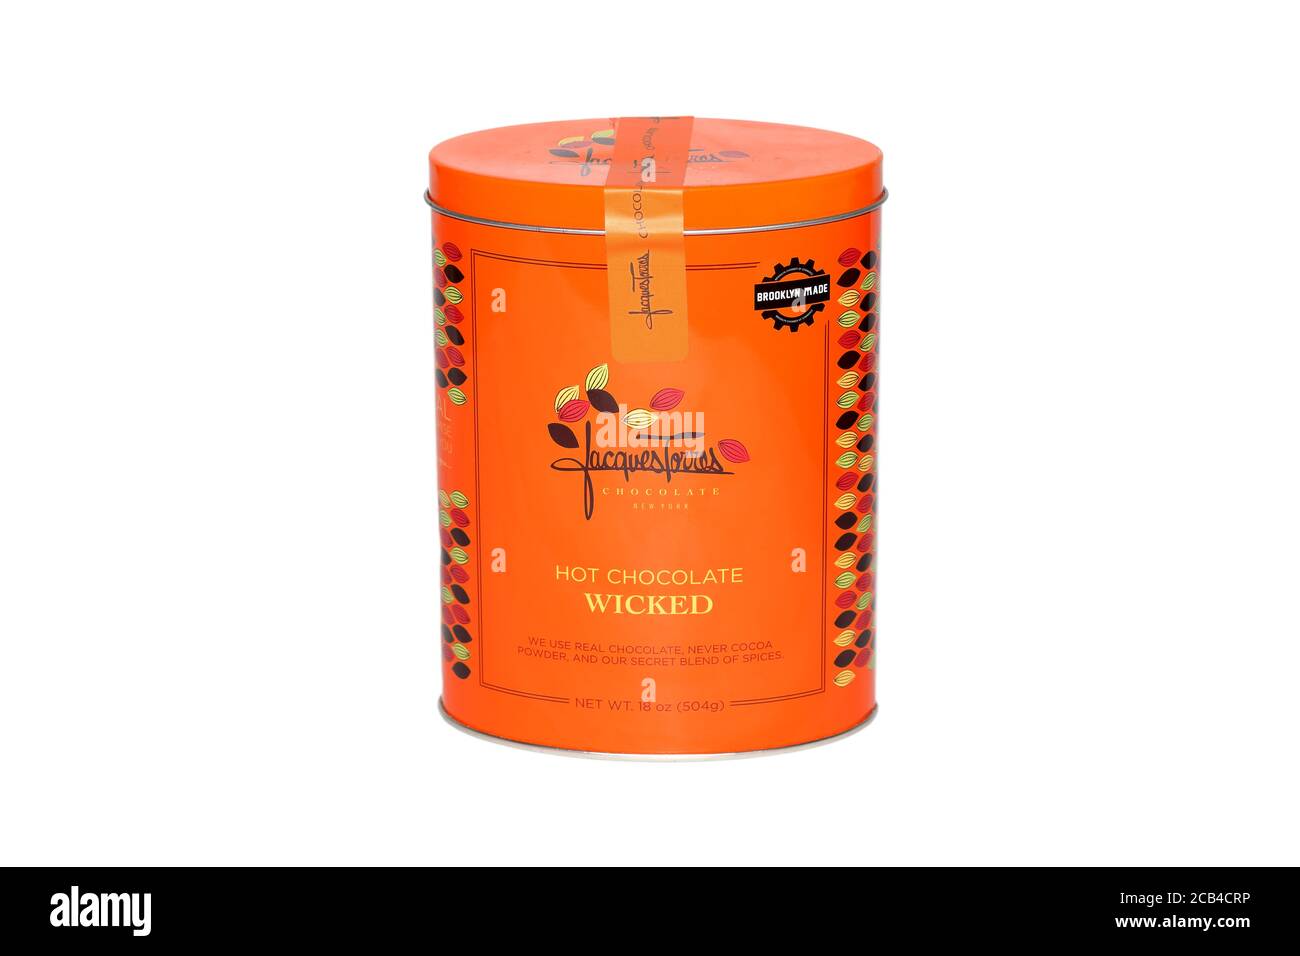 A 18oz tin of Jacques Torres Wicked Hot Chocolate, drinking chocolate, isolated on a white background for illustration and editorial use. Stock Photo